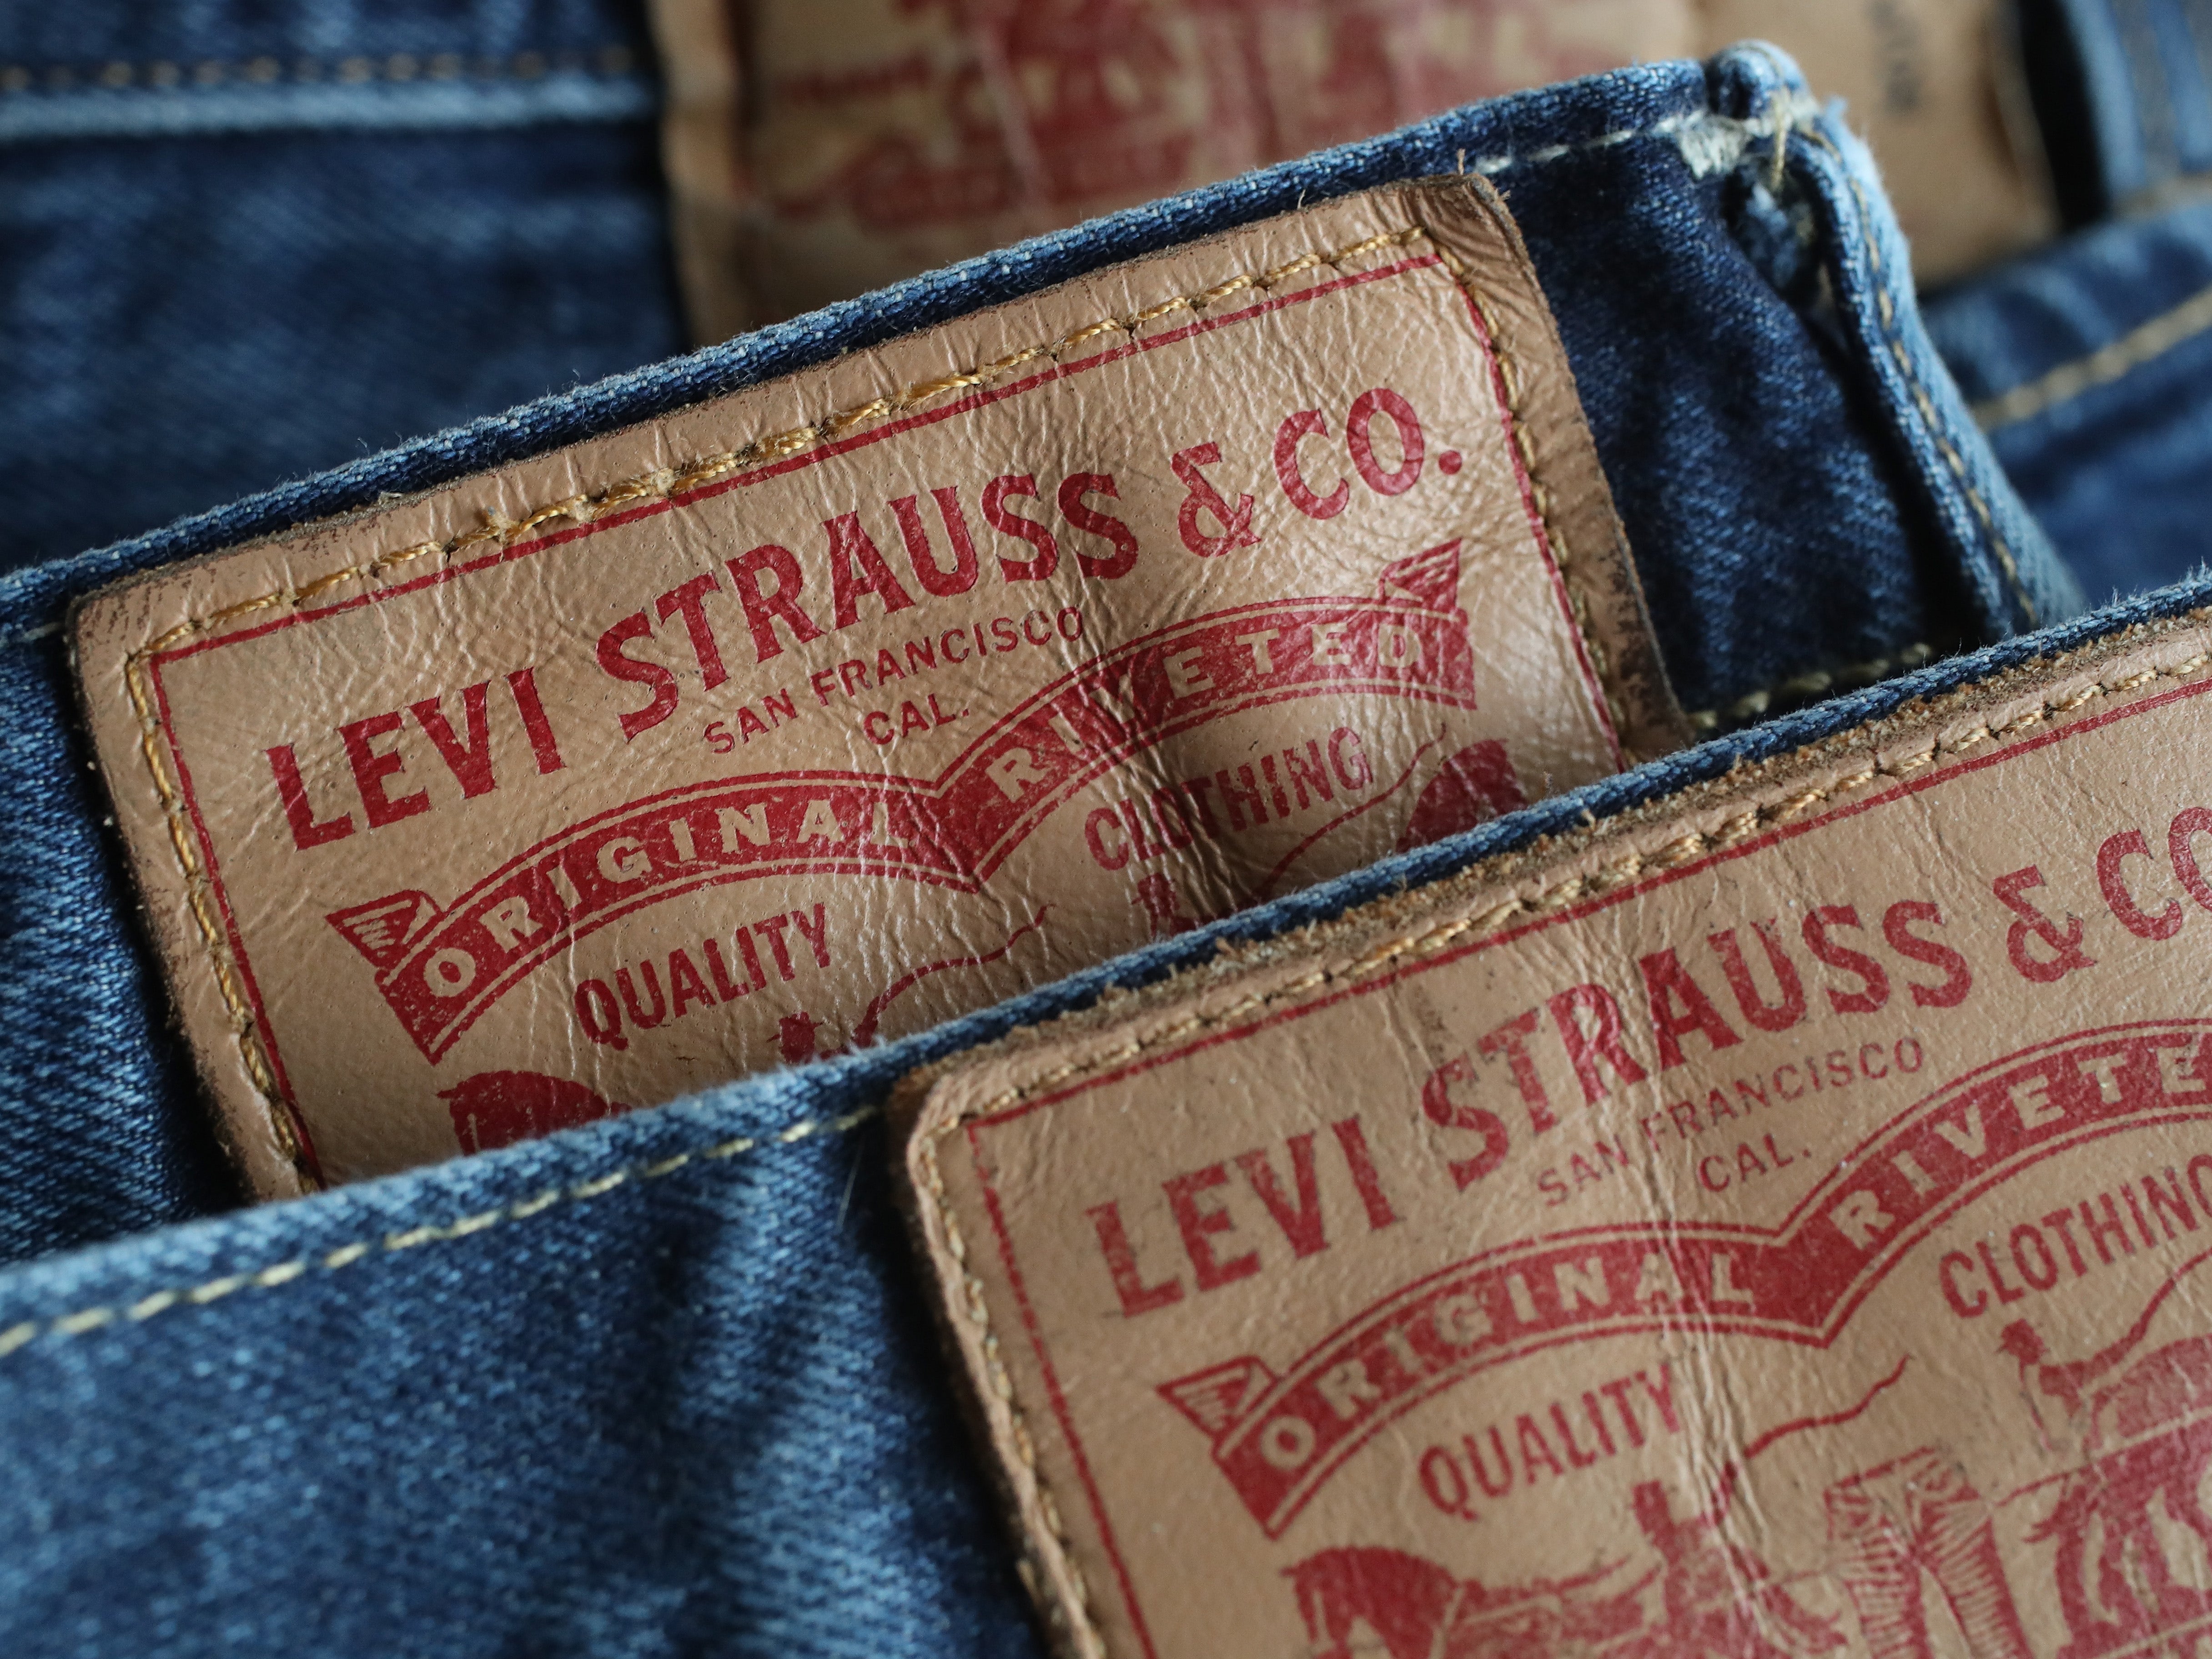 Levi Strauss & co. appoints michelle gass as president (NYSE:LEVI) |  Seeking Alpha